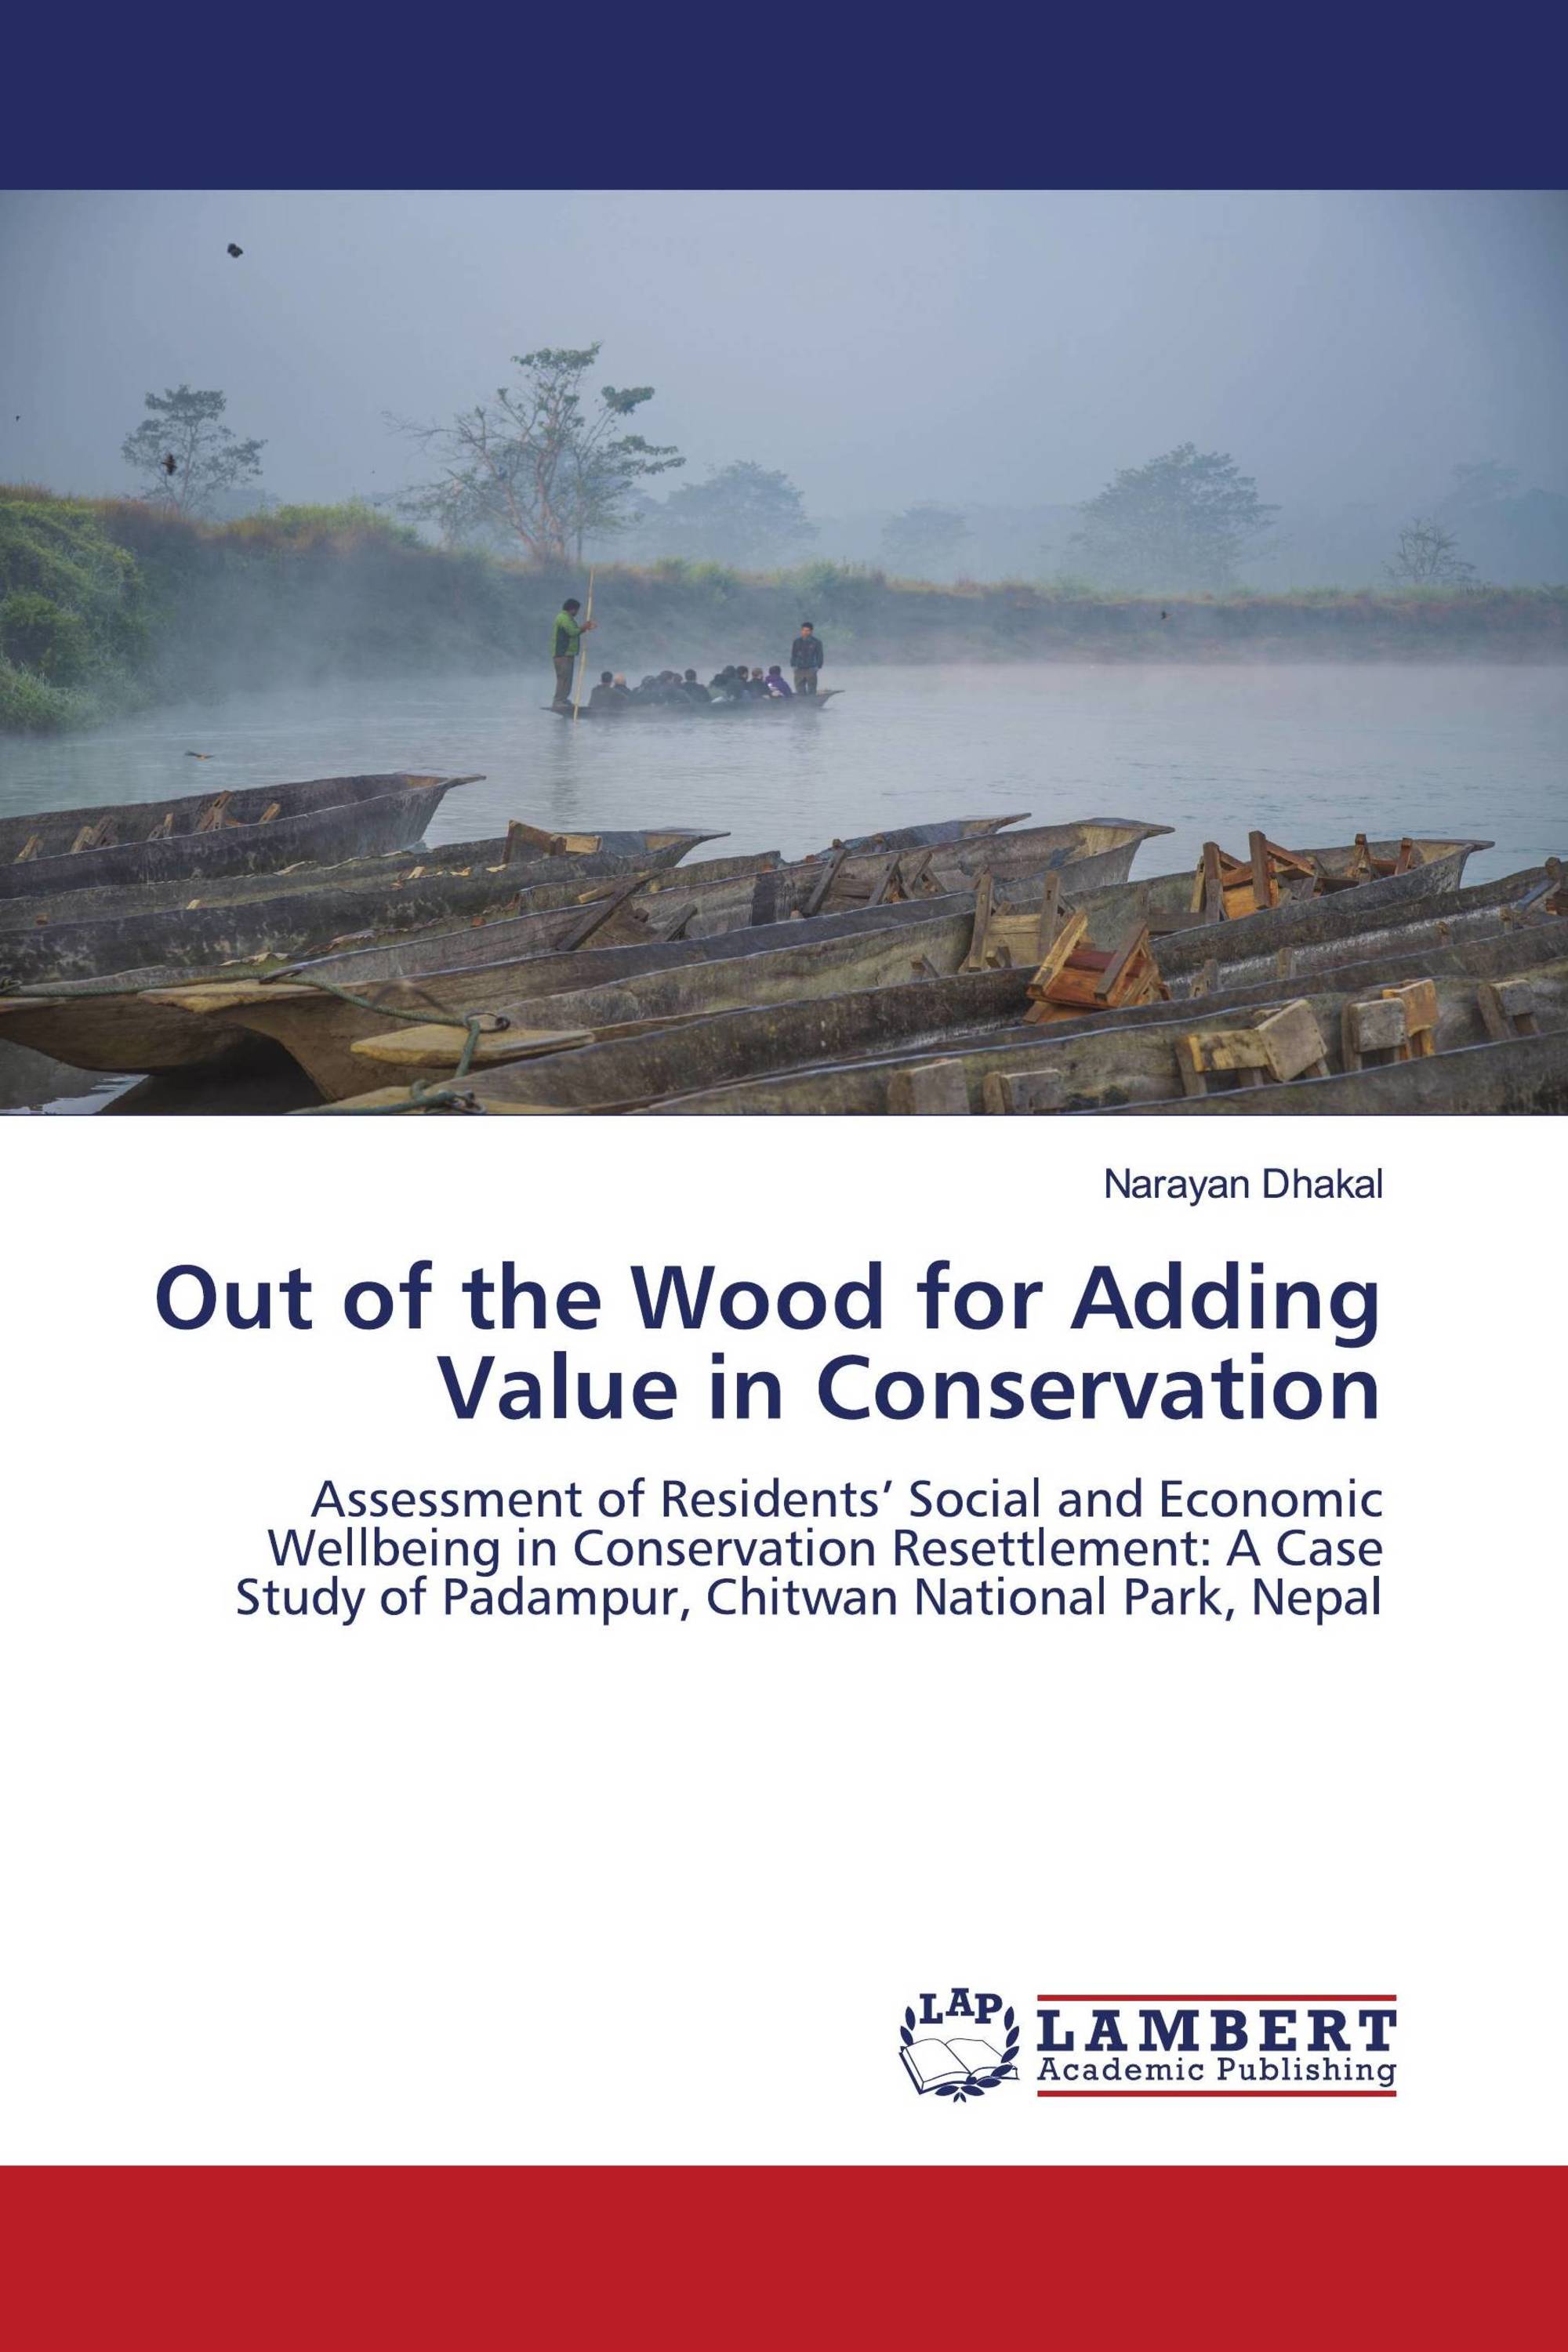 Out of the Wood for Adding Value in Conservation